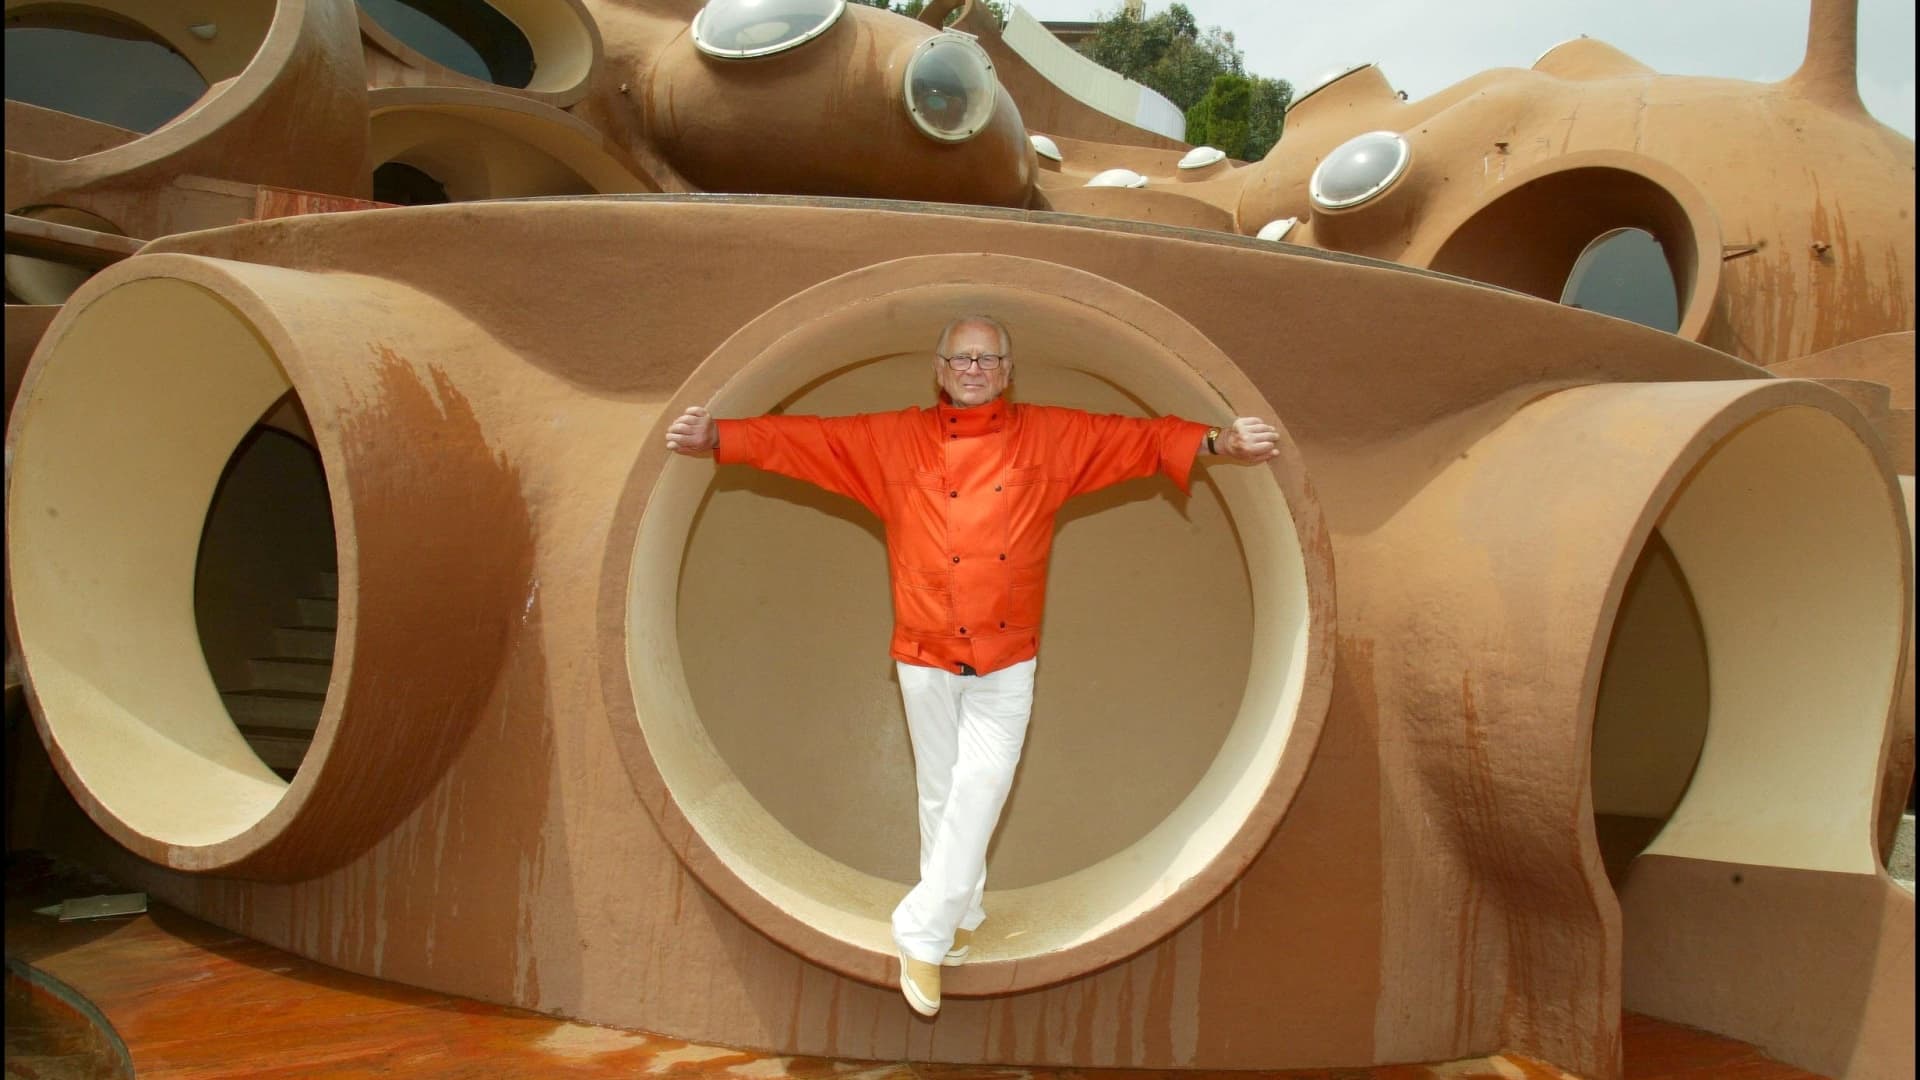 At his Palais Bulles, Pierre Cardin celebrates his 80th birthday and 50 years of fashion designing in May 2003.